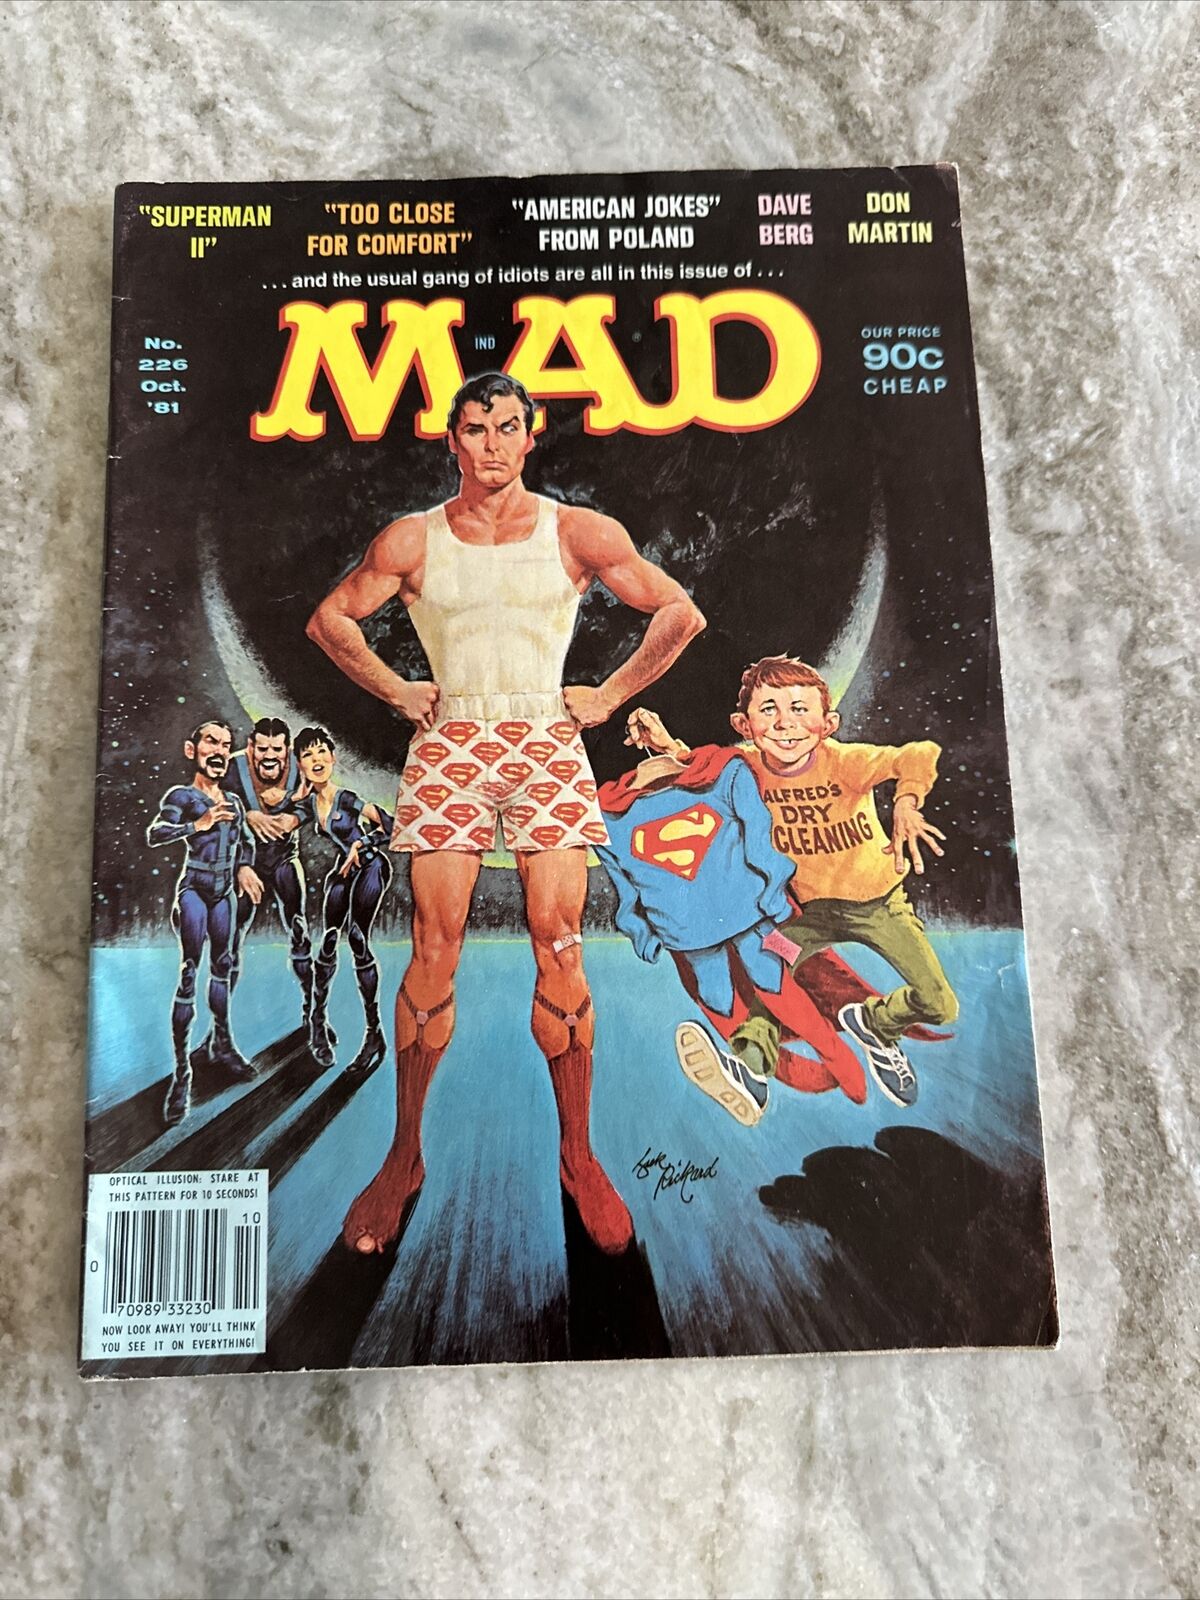 MAD Mad Magazine #226 October 1981 - Superman, Too Close For Comfort